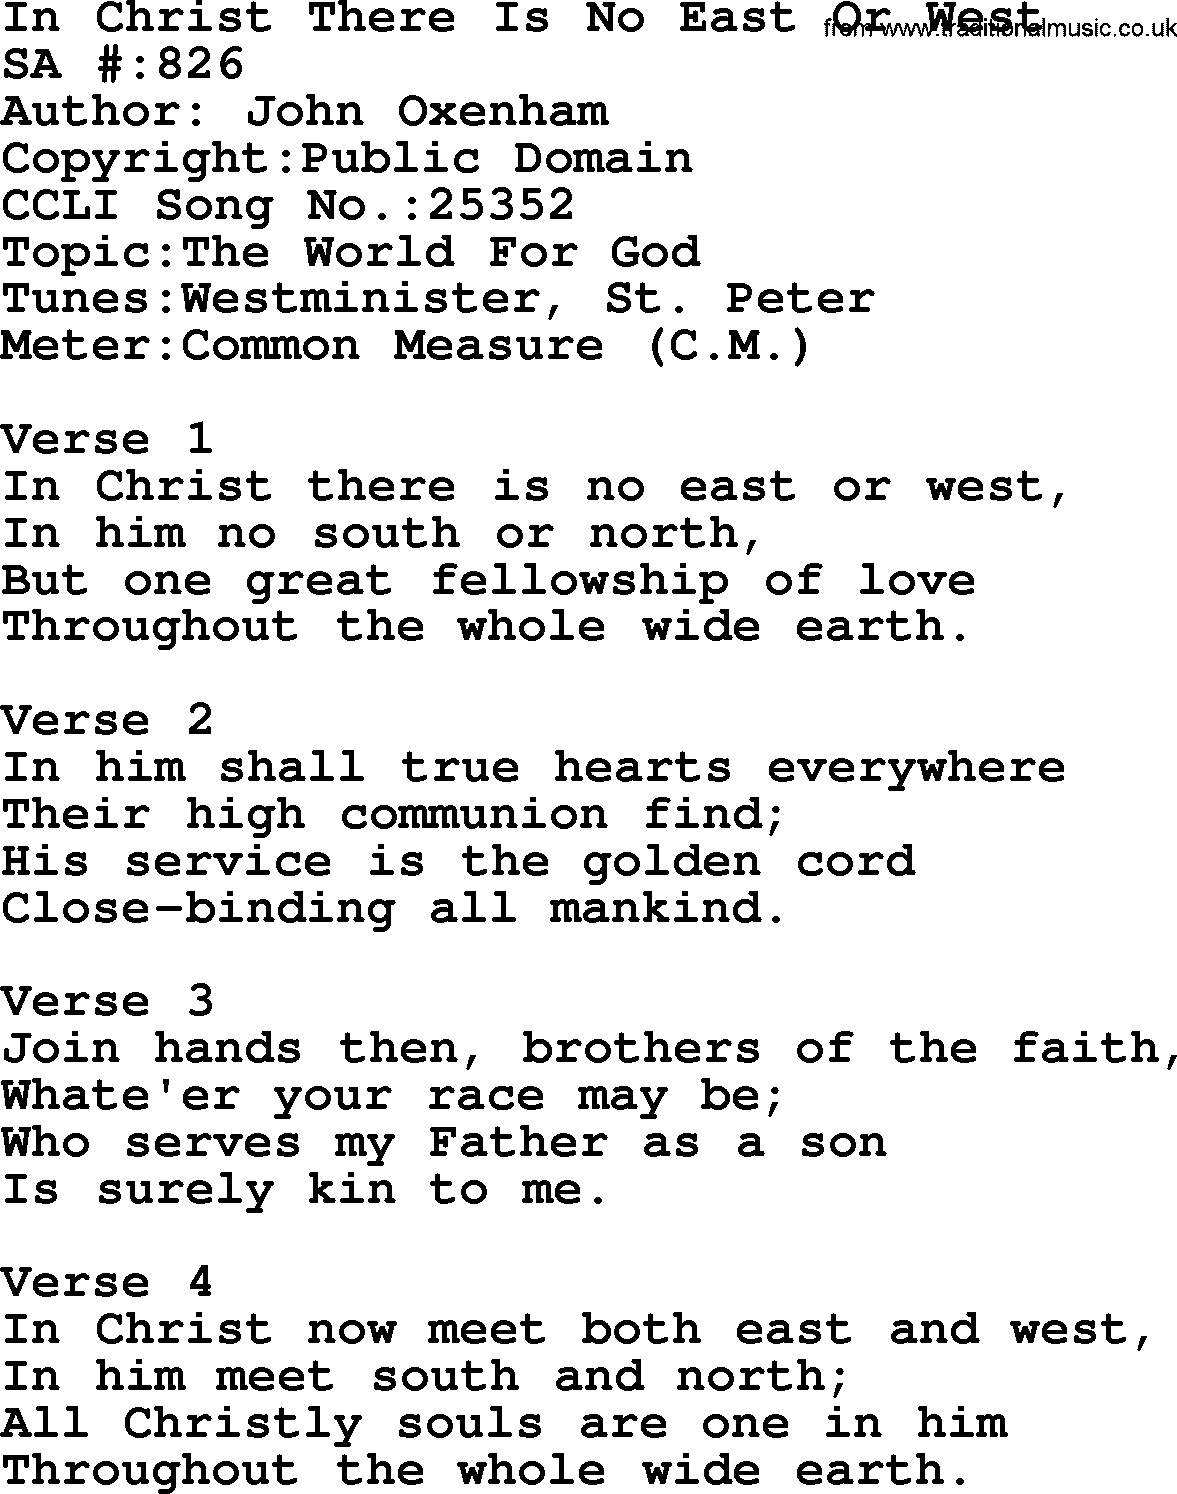 Salvation Army Hymnal, title: In Christ There Is No East Or West, with lyrics and PDF,